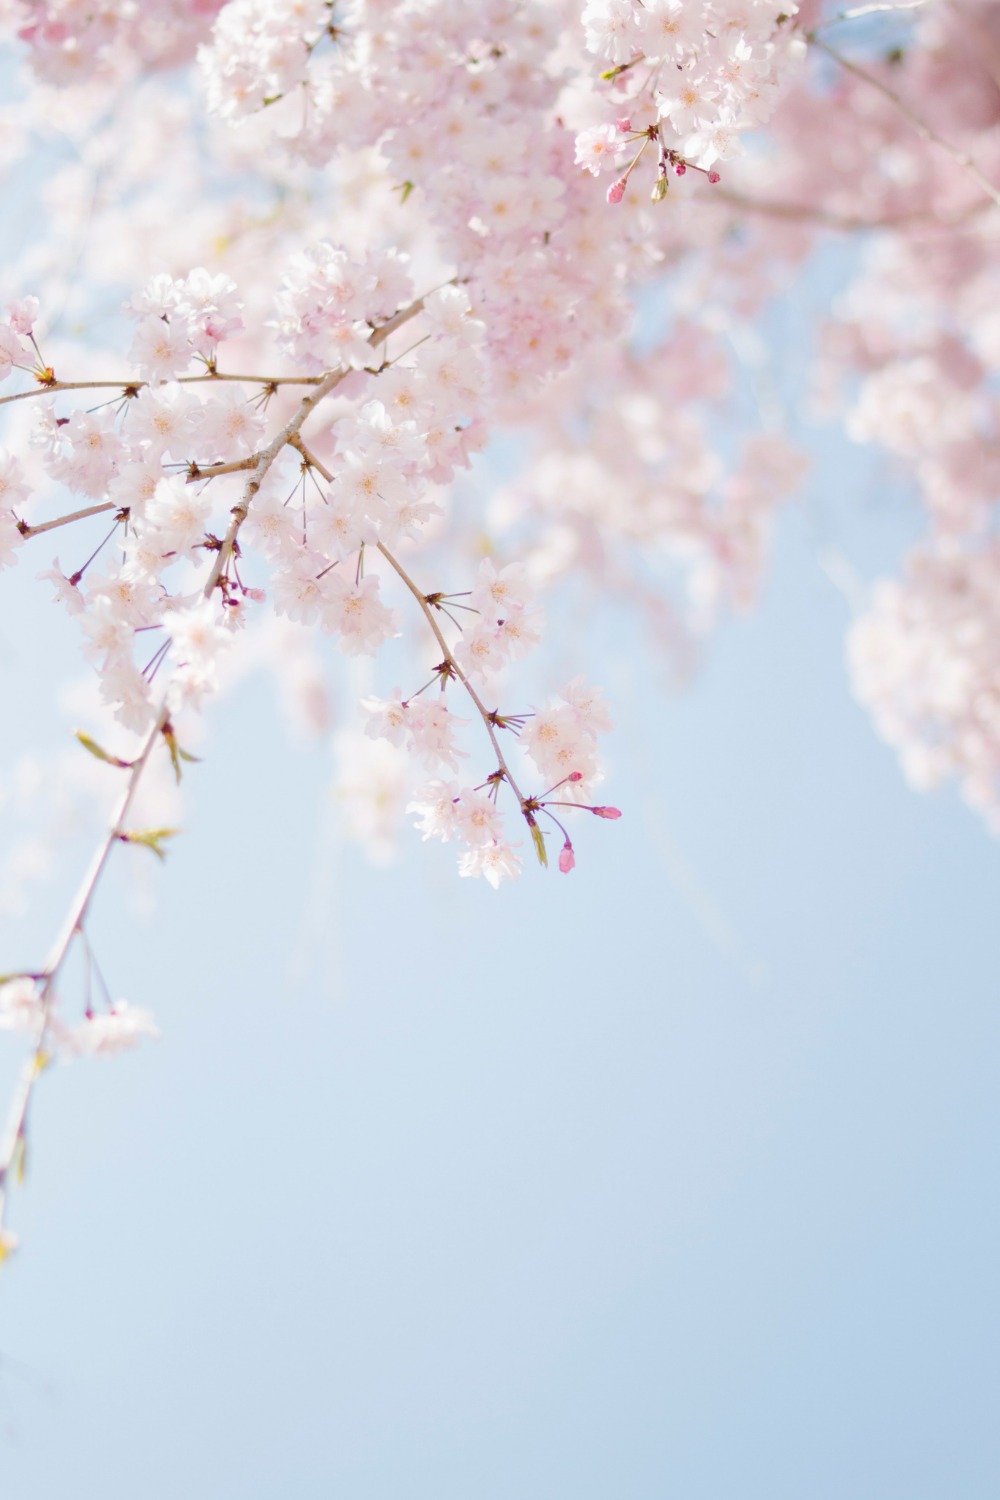 Beautiful spring photos for spring inspo, spring pics, green spring pictures, spring nature, and spring aesthetic nature. Many spring aesthetic wallpaper images. Spring aesthetic inspiration, spring aesthetic pictures, and spring aesthetic photography.